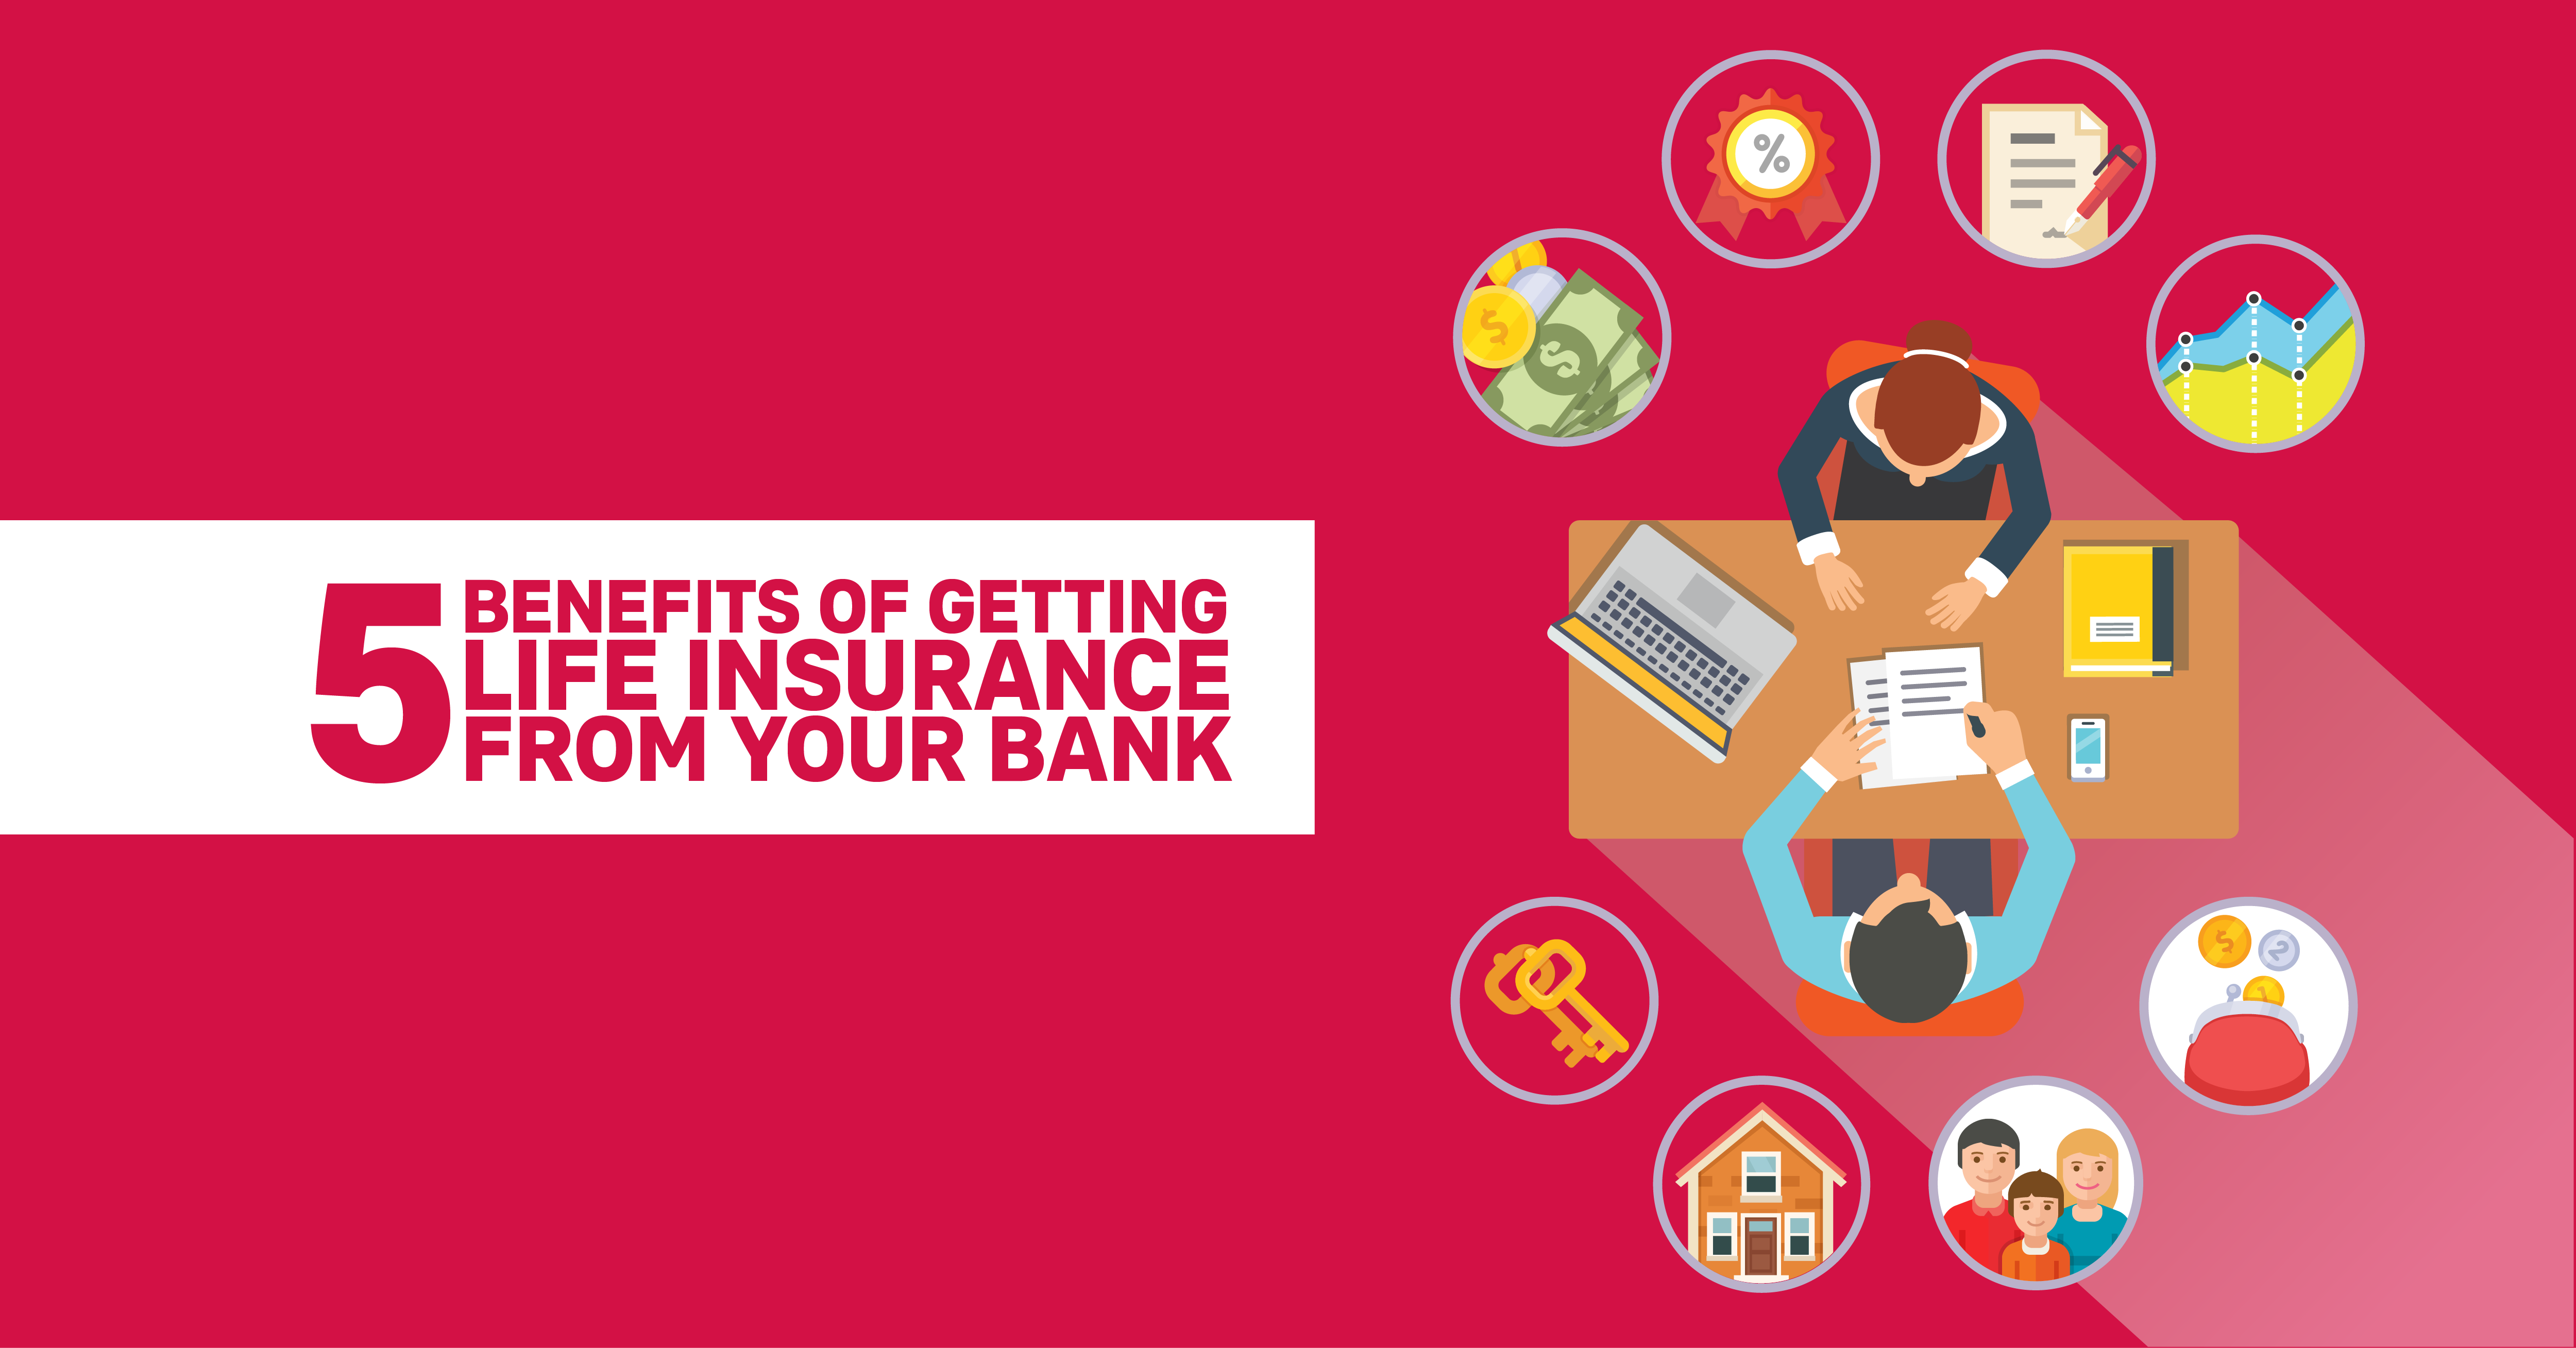 Benefits of Bancassurance: Here’s Why You Should Buy Life Insurance From Your Bank